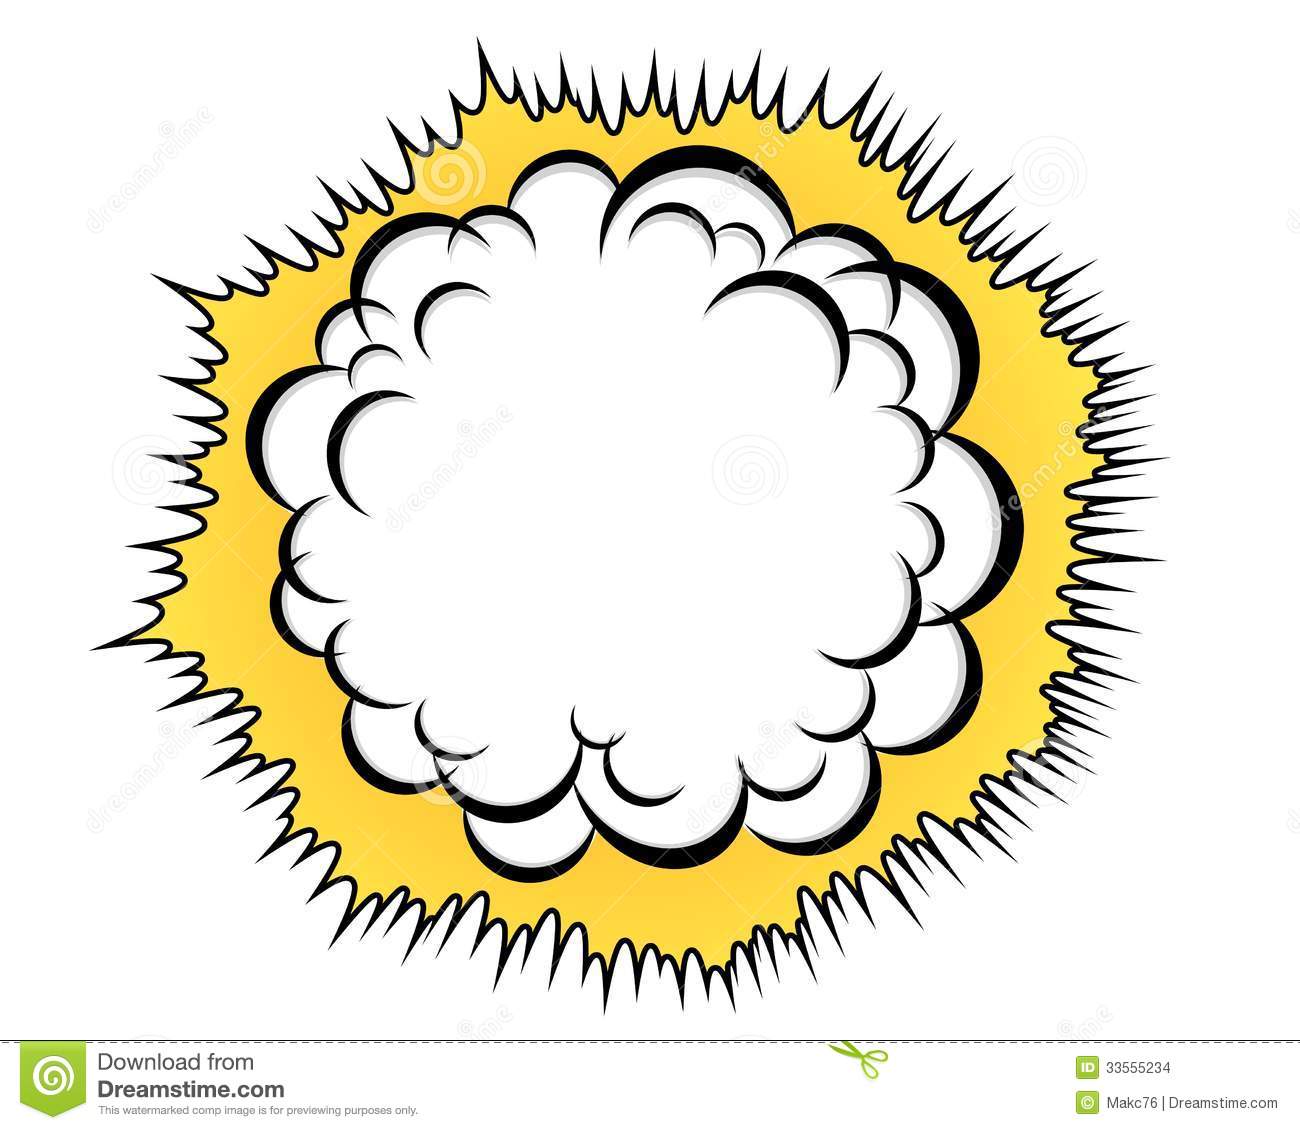 Cloud After The Explosion Stock Images   Image  33555234